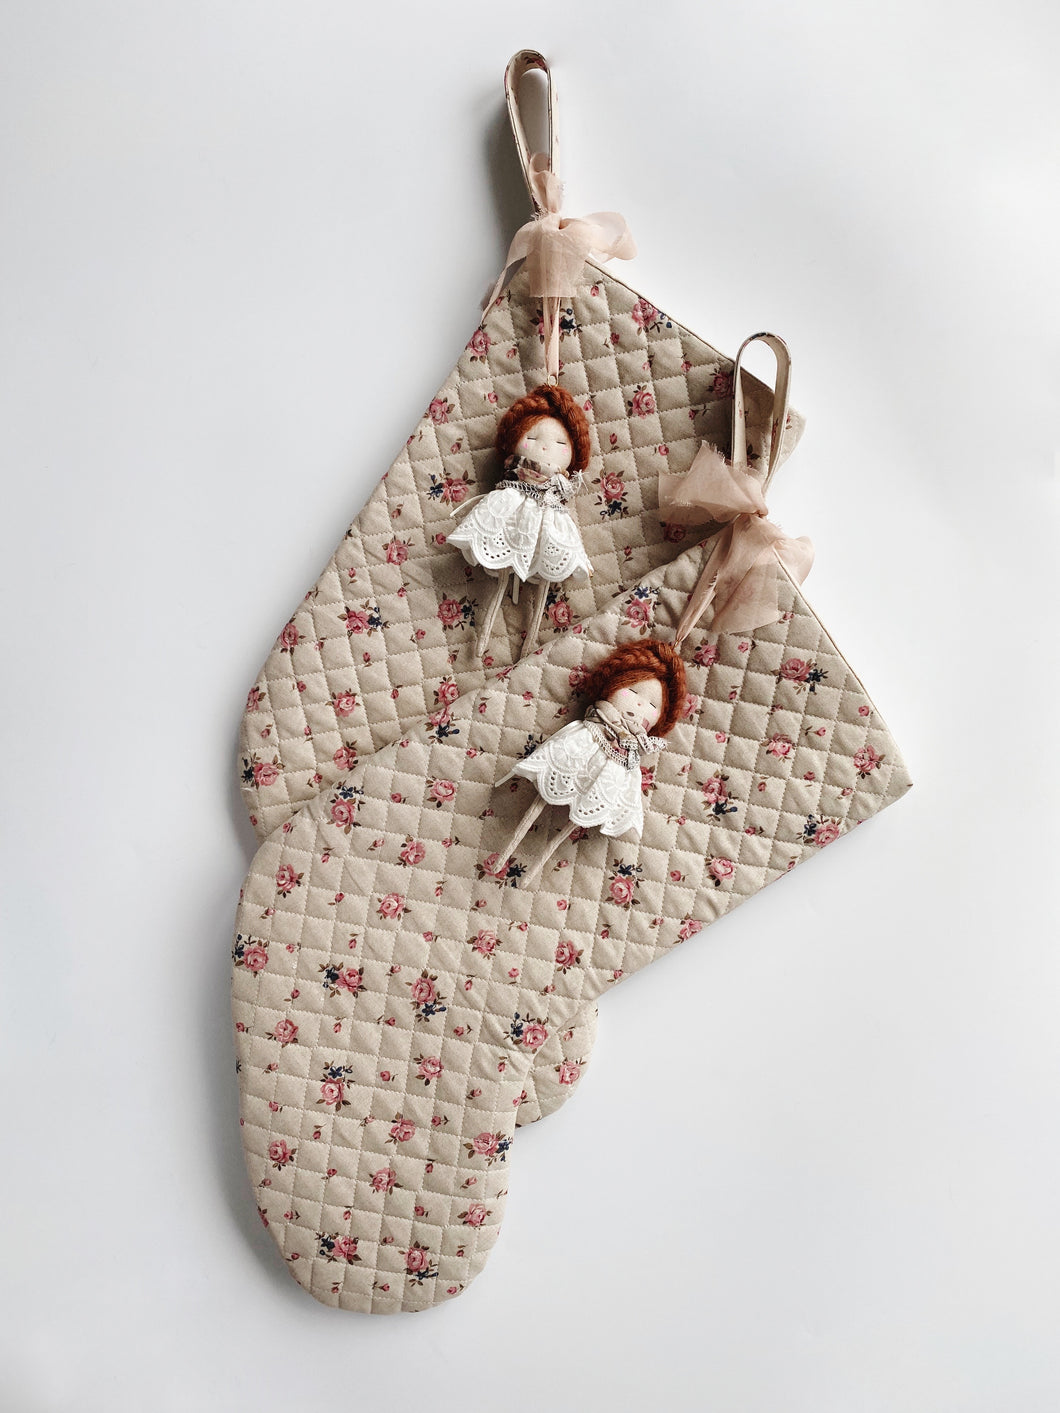 Floral Hanging Doll Stocking (plaited hair up).